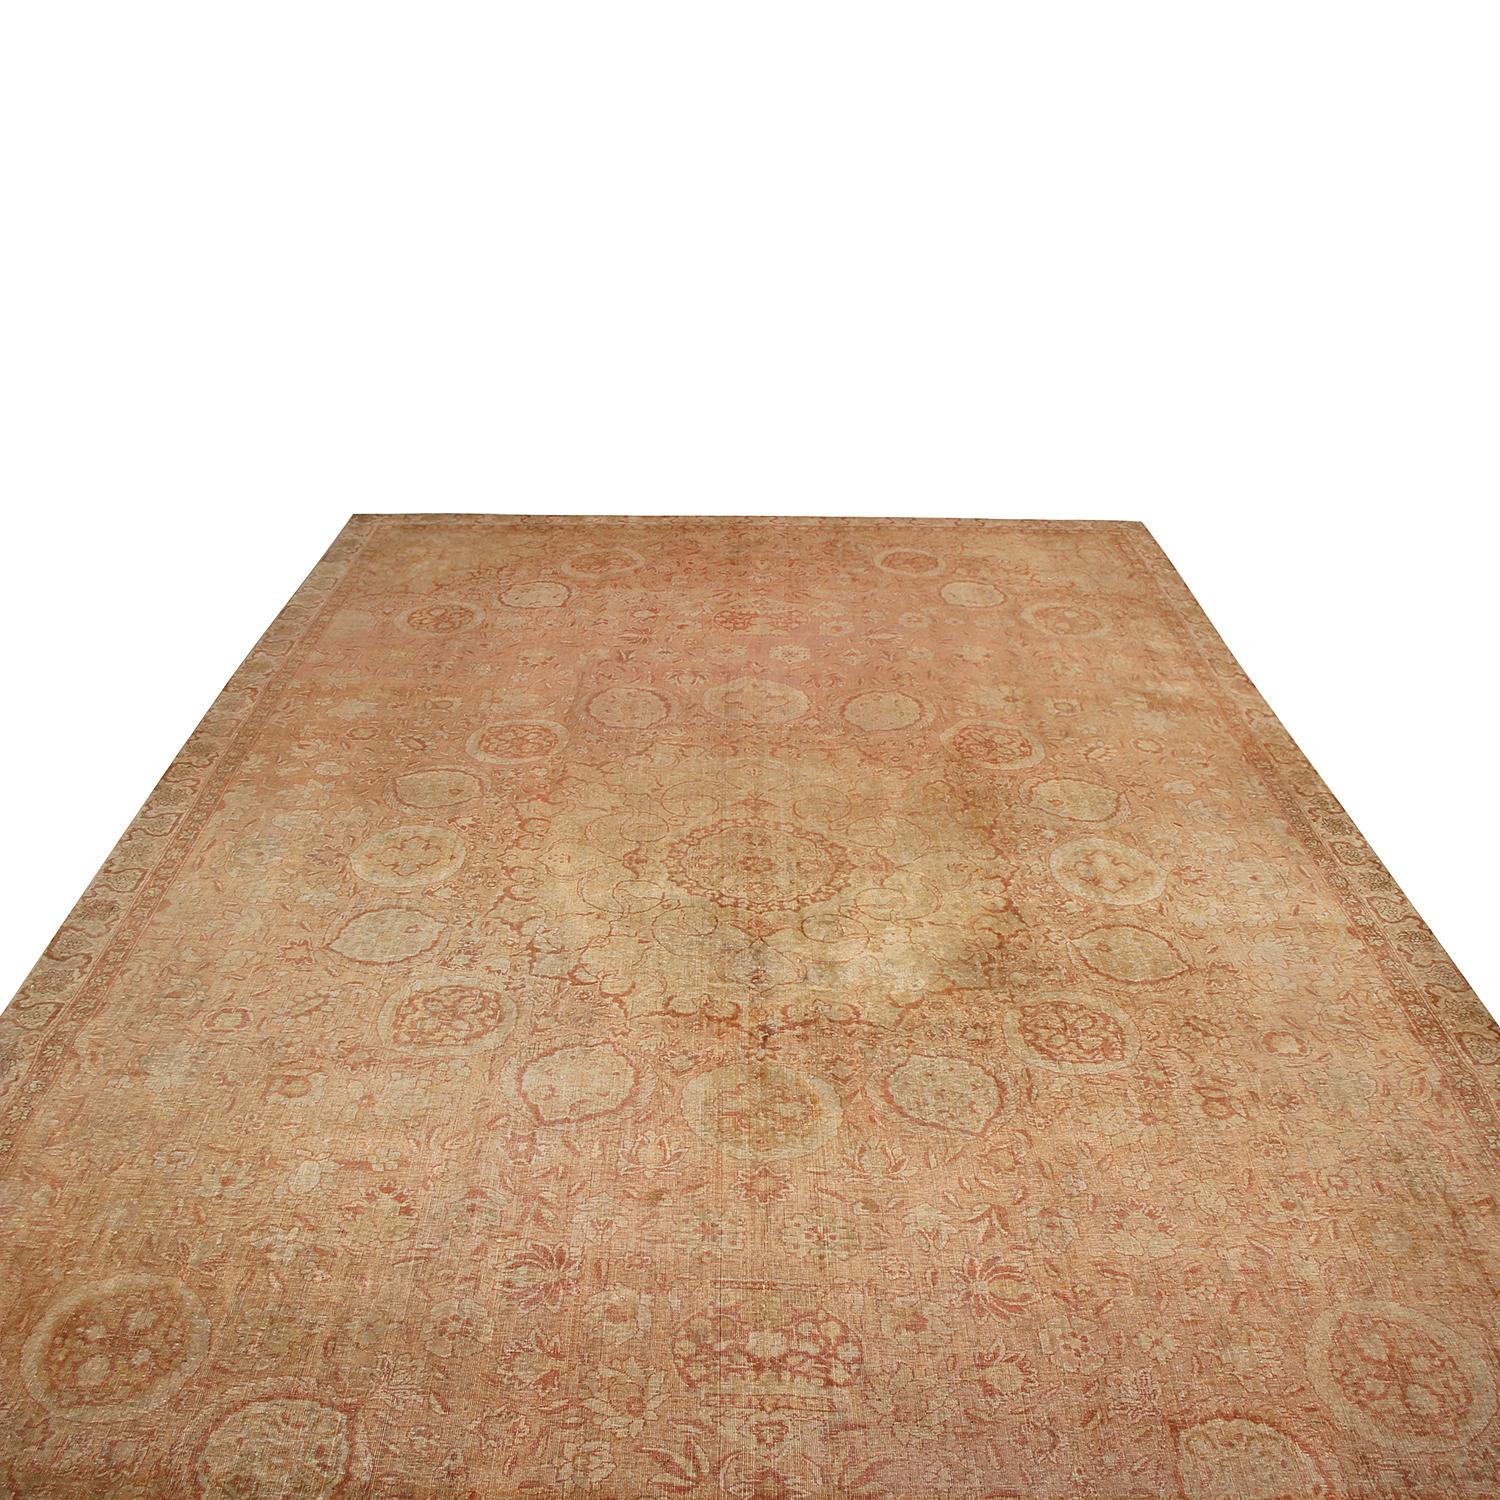 Hand knotted in India originating between 1890-1900, this antique Amritsar wool rug enjoys a marriage of traditional appeal with a distinct artisan finesse appealing to a variety of classic and transitional interiors. The meticulous attention to